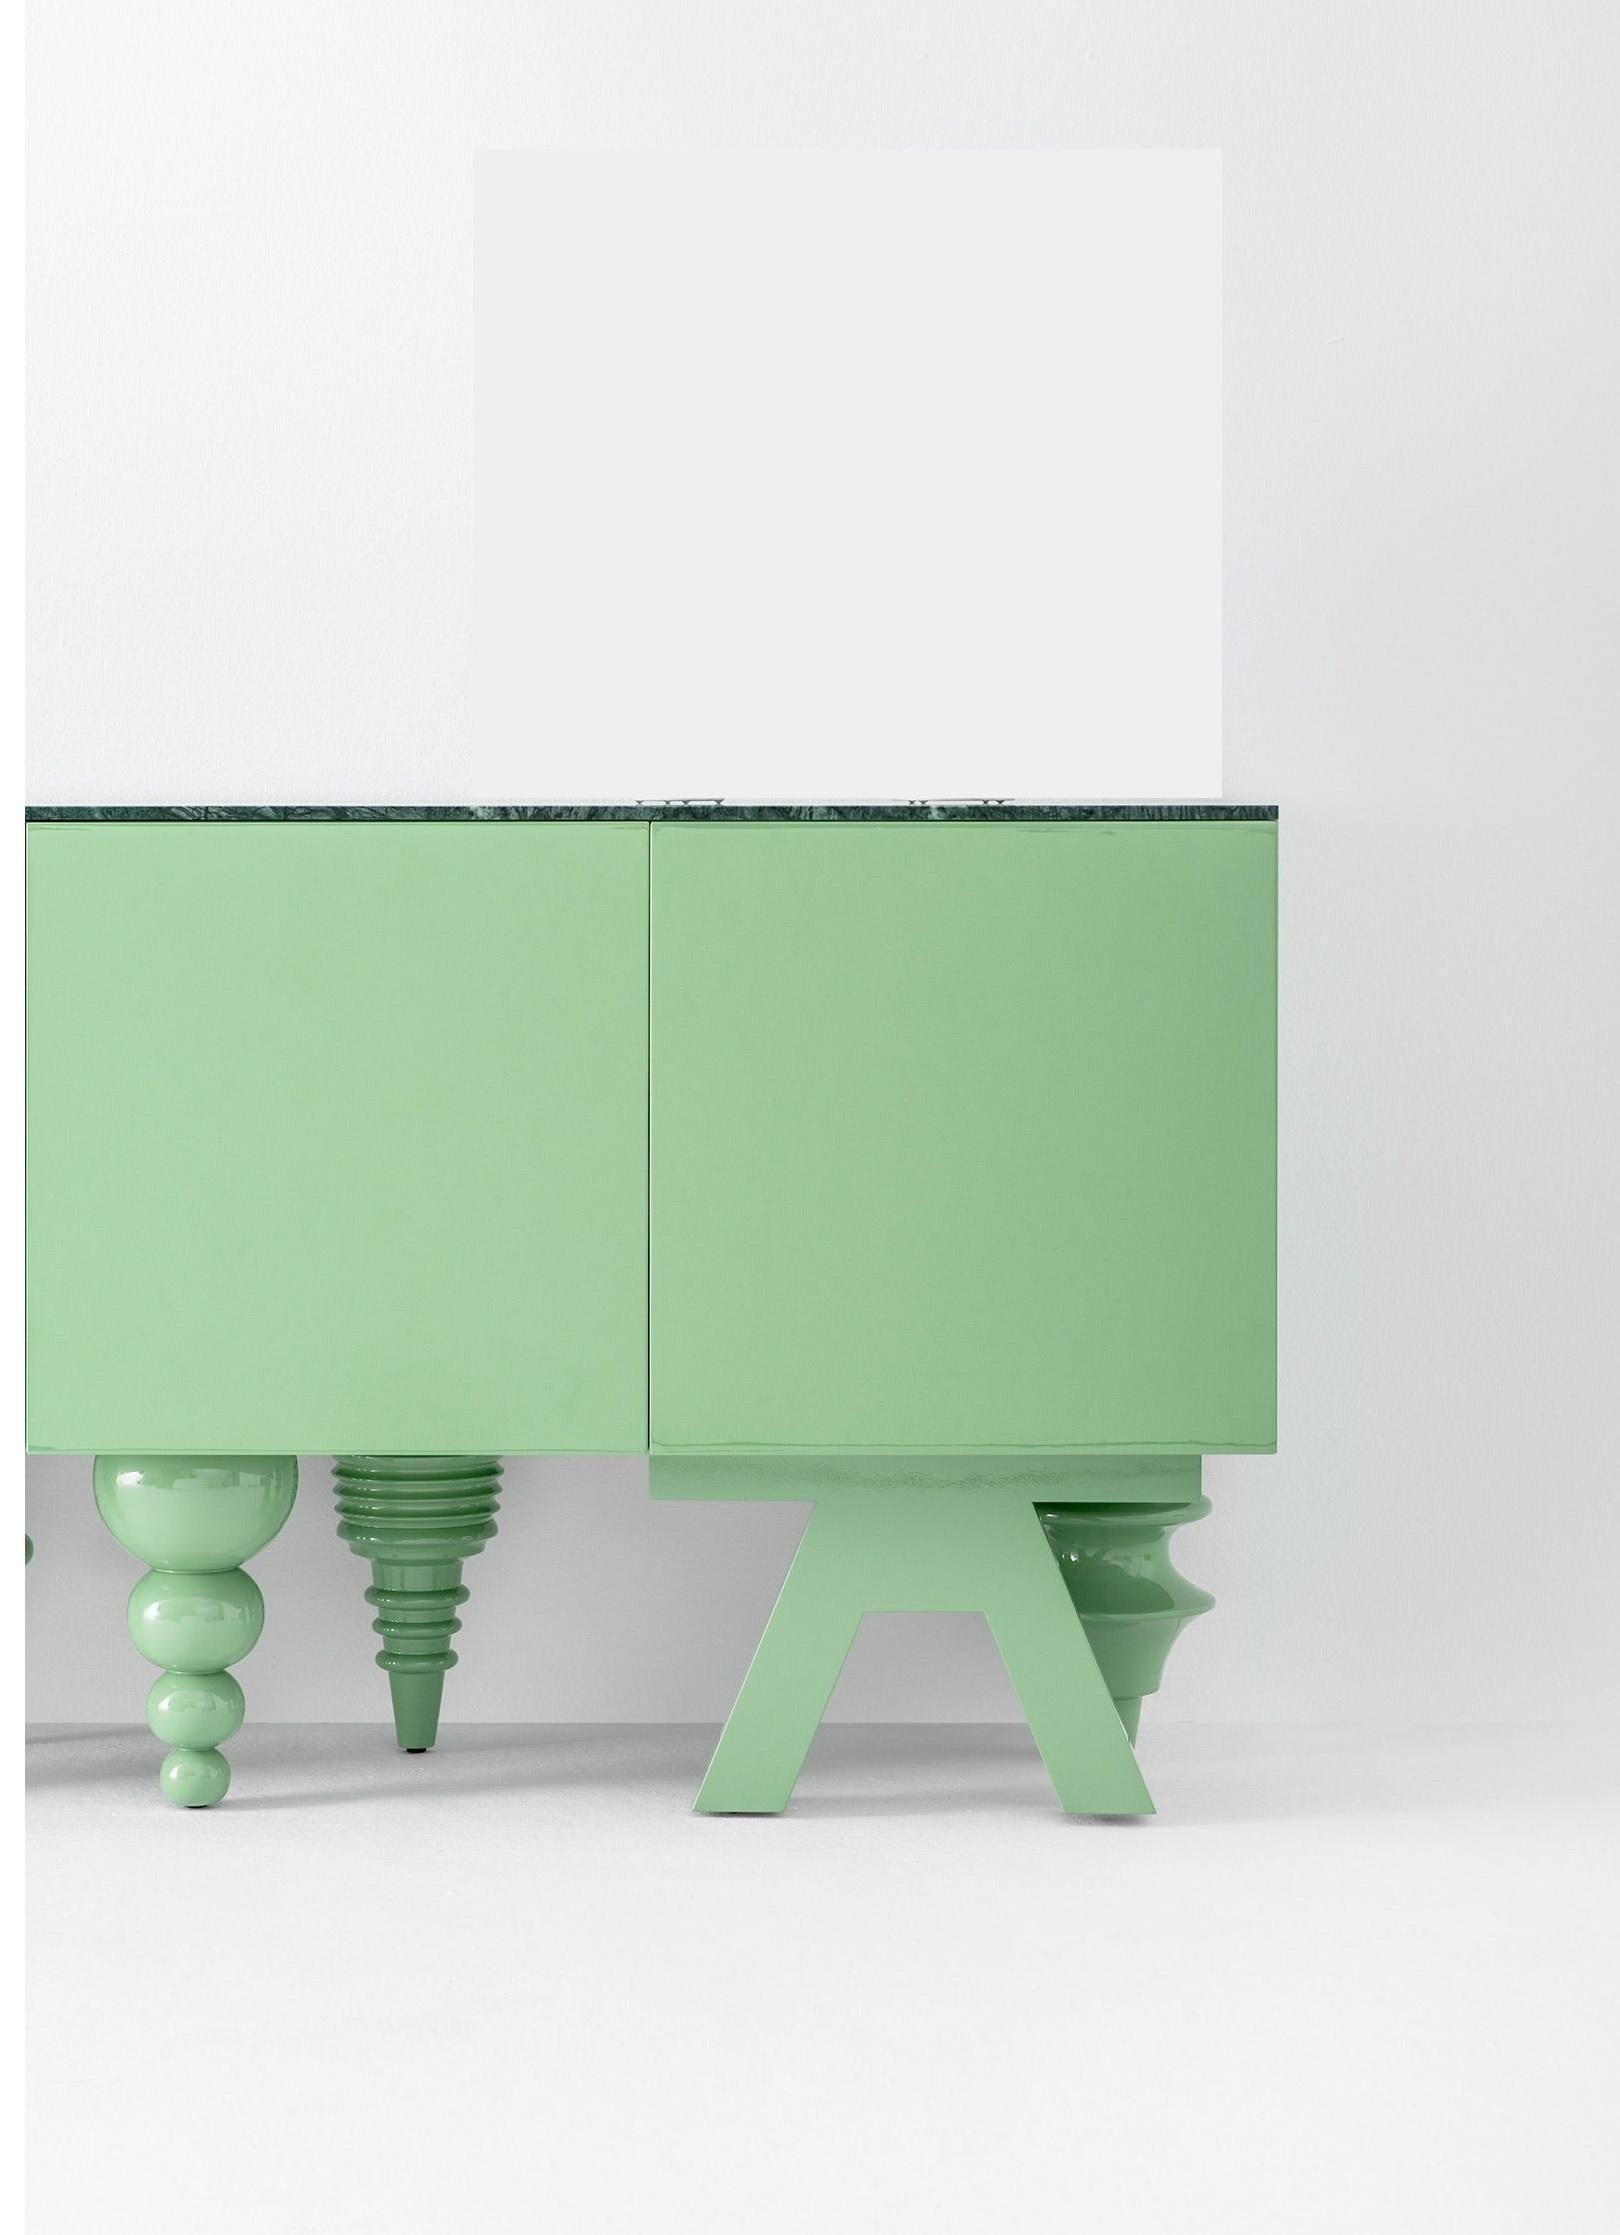 Marble 1 meter multileg cabinet by Jaime Hayon
Dimensions: D 50 x W 100 x H 80 cm 
Materials: Containers, doors, and shelves in MDF with different widths. Legs in turned solid alder wood. Monochrome lacquered finishes are available in green RAL